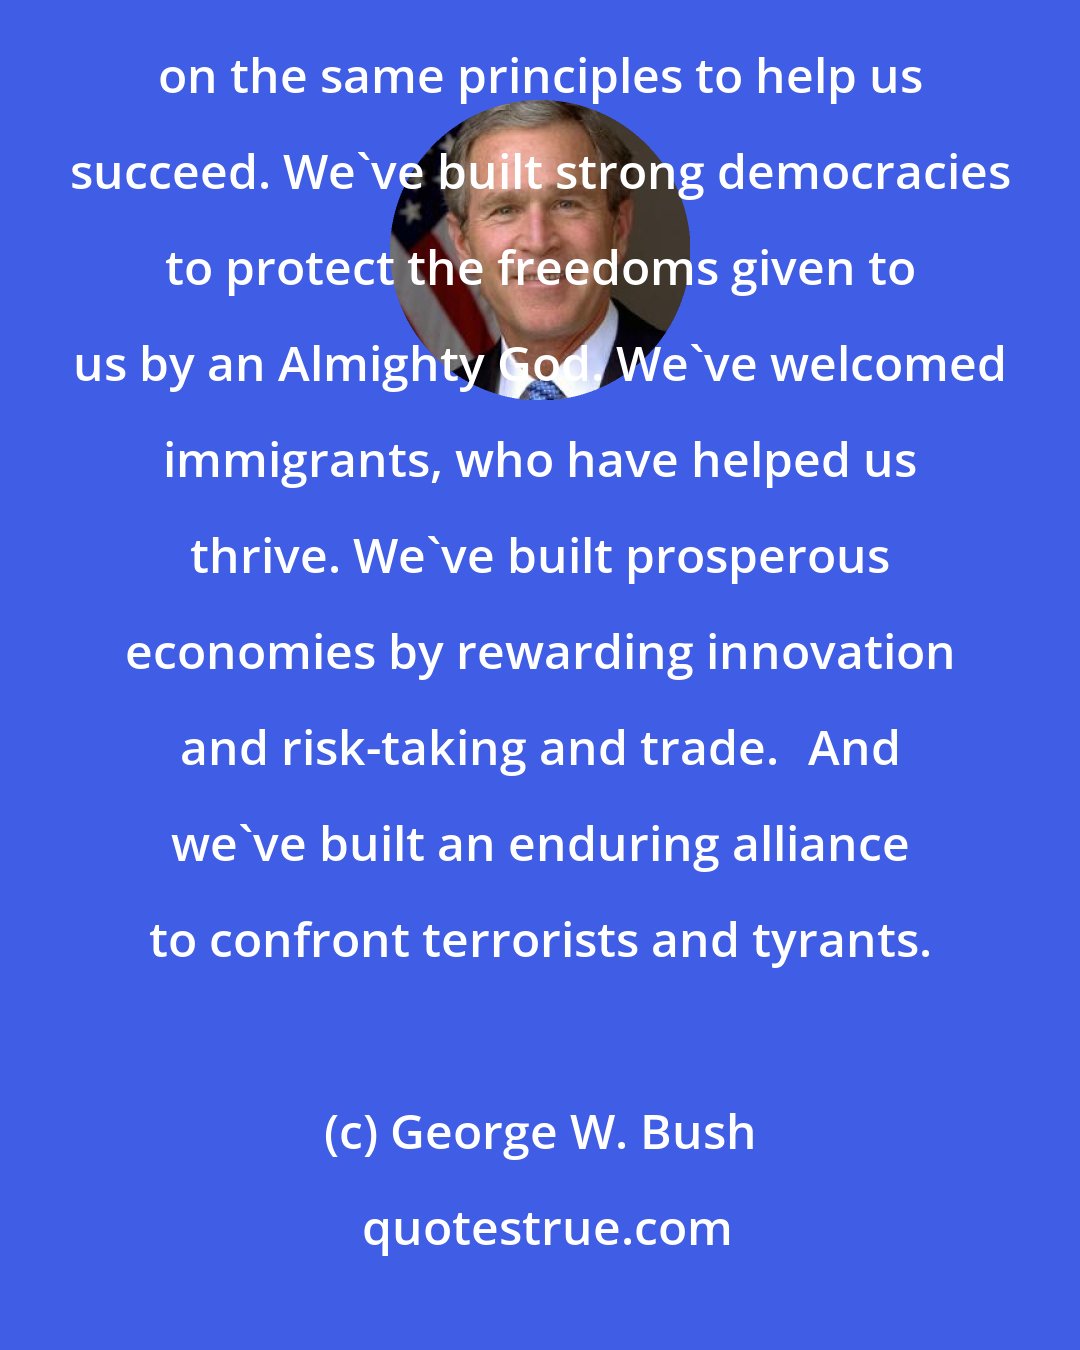 George W. Bush: Our two nations both faced great challenges when they were founded, and our two nations have both relied on the same principles to help us succeed. We've built strong democracies to protect the freedoms given to us by an Almighty God. We've welcomed immigrants, who have helped us thrive. We've built prosperous economies by rewarding innovation and risk-taking and trade.	And we've built an enduring alliance to confront terrorists and tyrants.